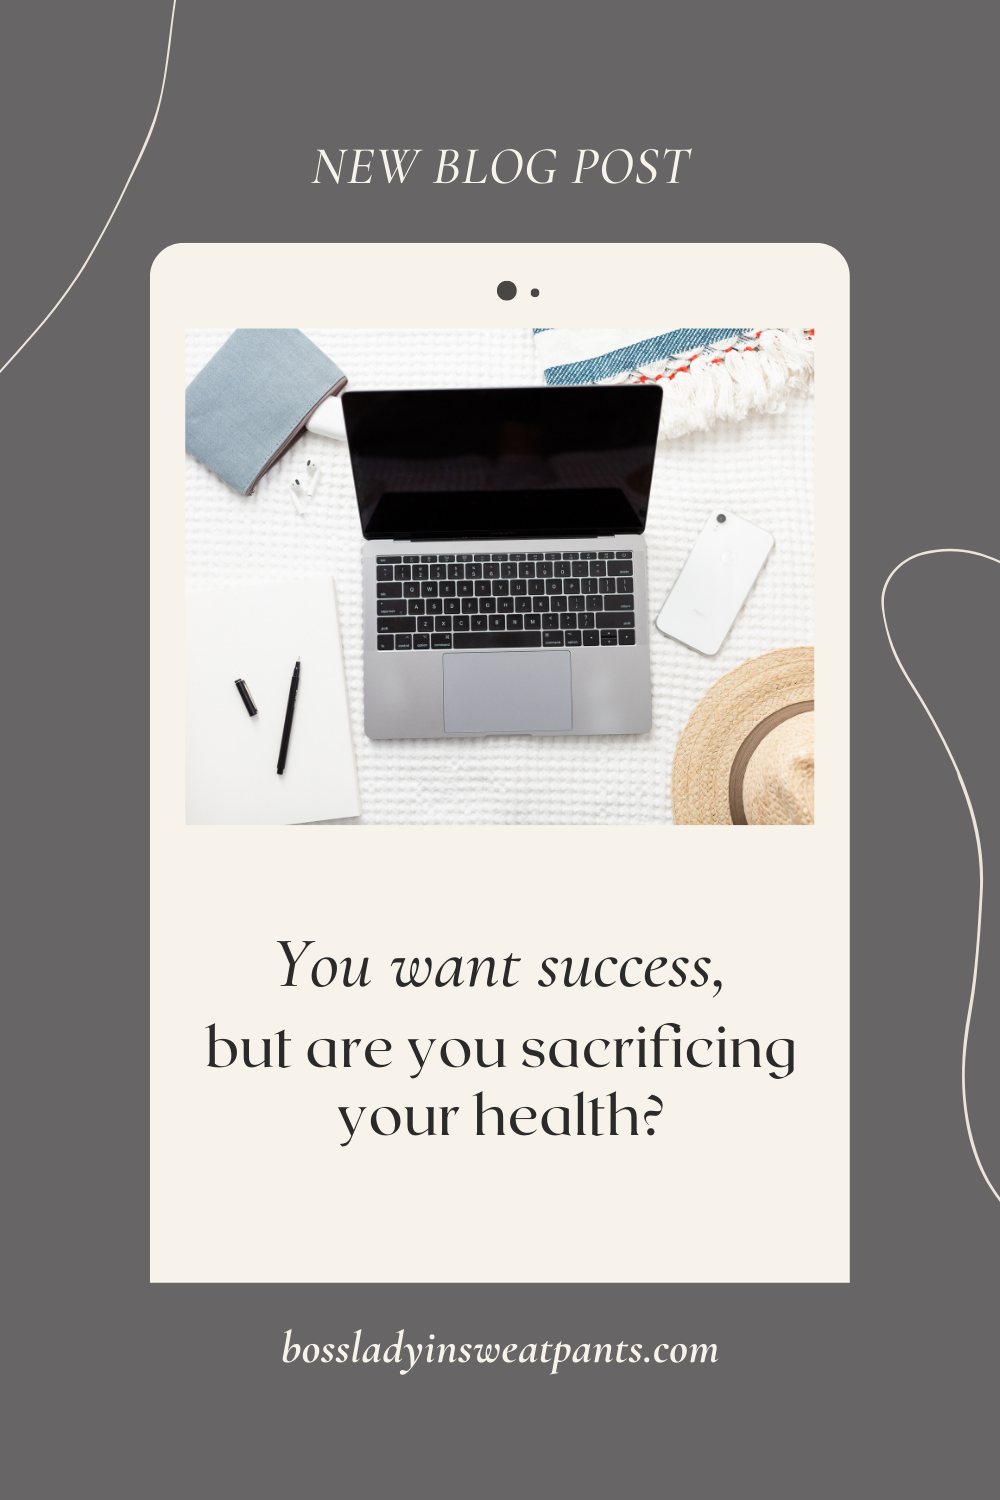 graphic for a new blog post, YOU WANT SUCCESS, BUT ARE YOU SACRIFICING YOUR HEALTH? Shows a photo of a laptop on the ground surrounded by a hat and business essentials